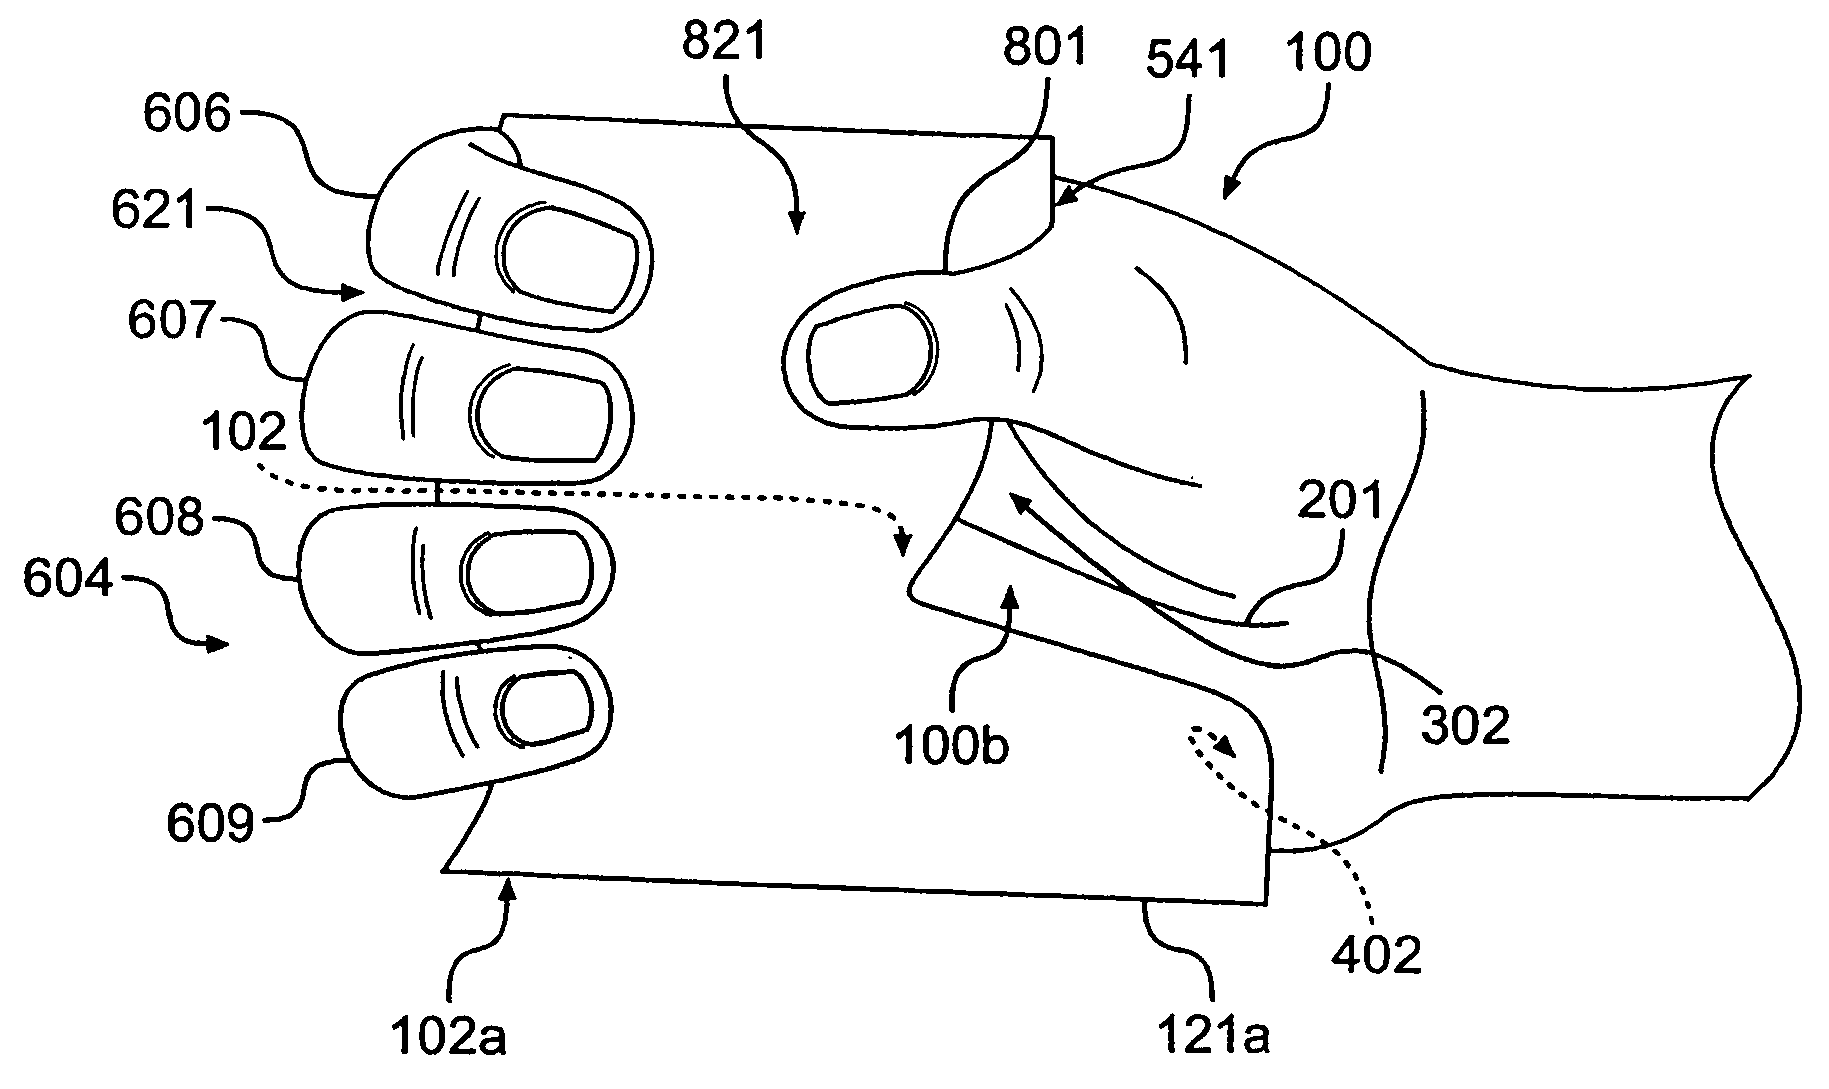 Handle/grip and method for designing the like